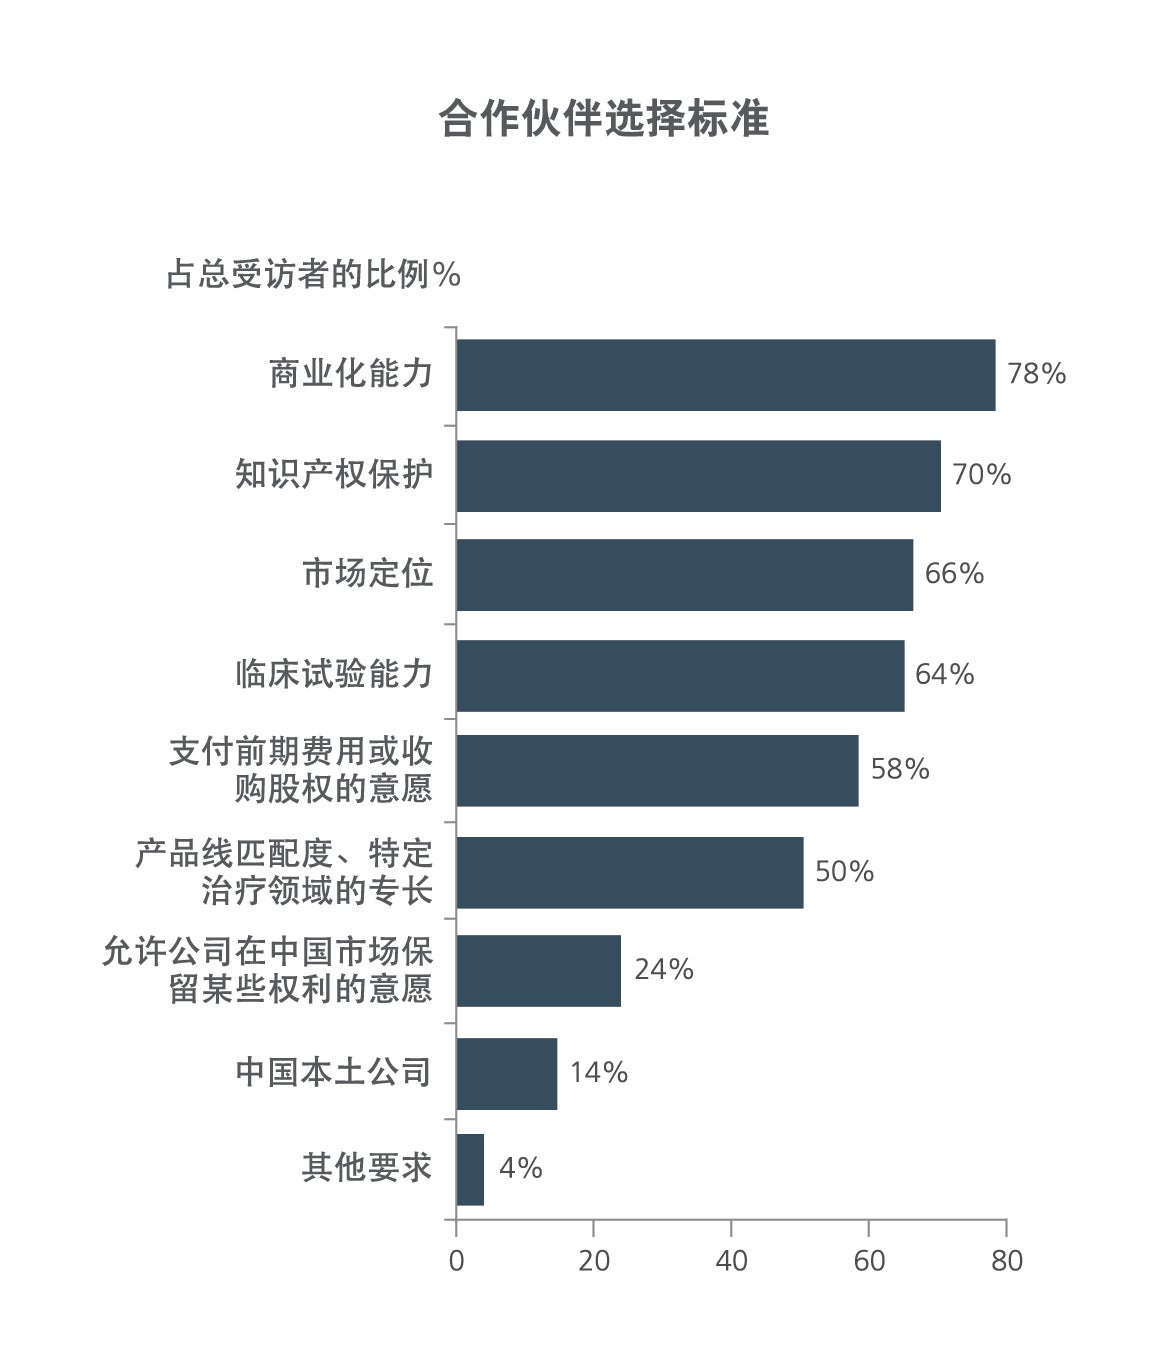 partner selection criteria in china